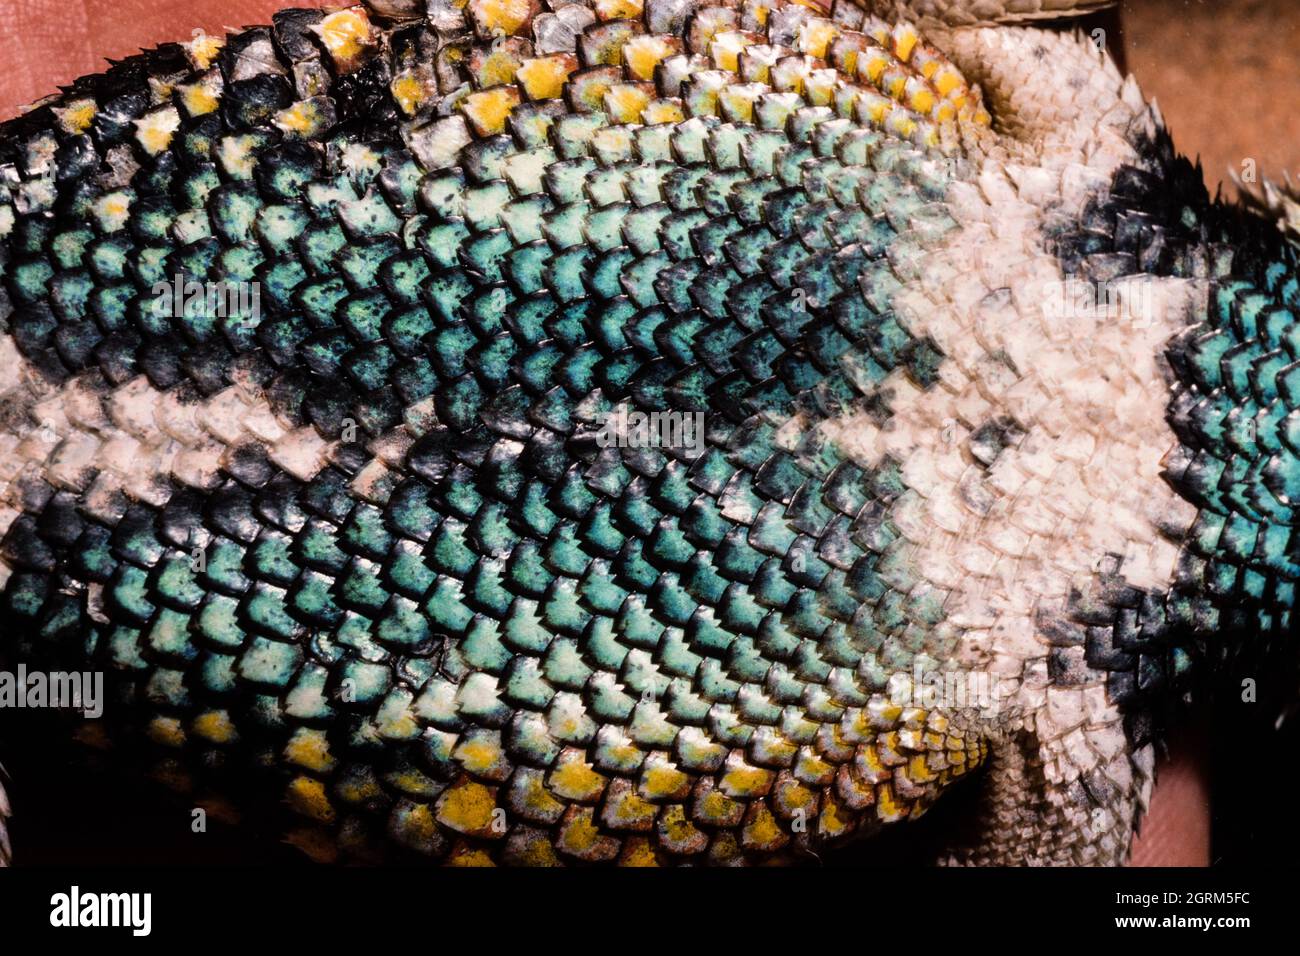 The colorful ventral scales of a male Desert Spiny Lizard, Sceloporus magister, native to the southwestern U.S. & Mexico. Stock Photo